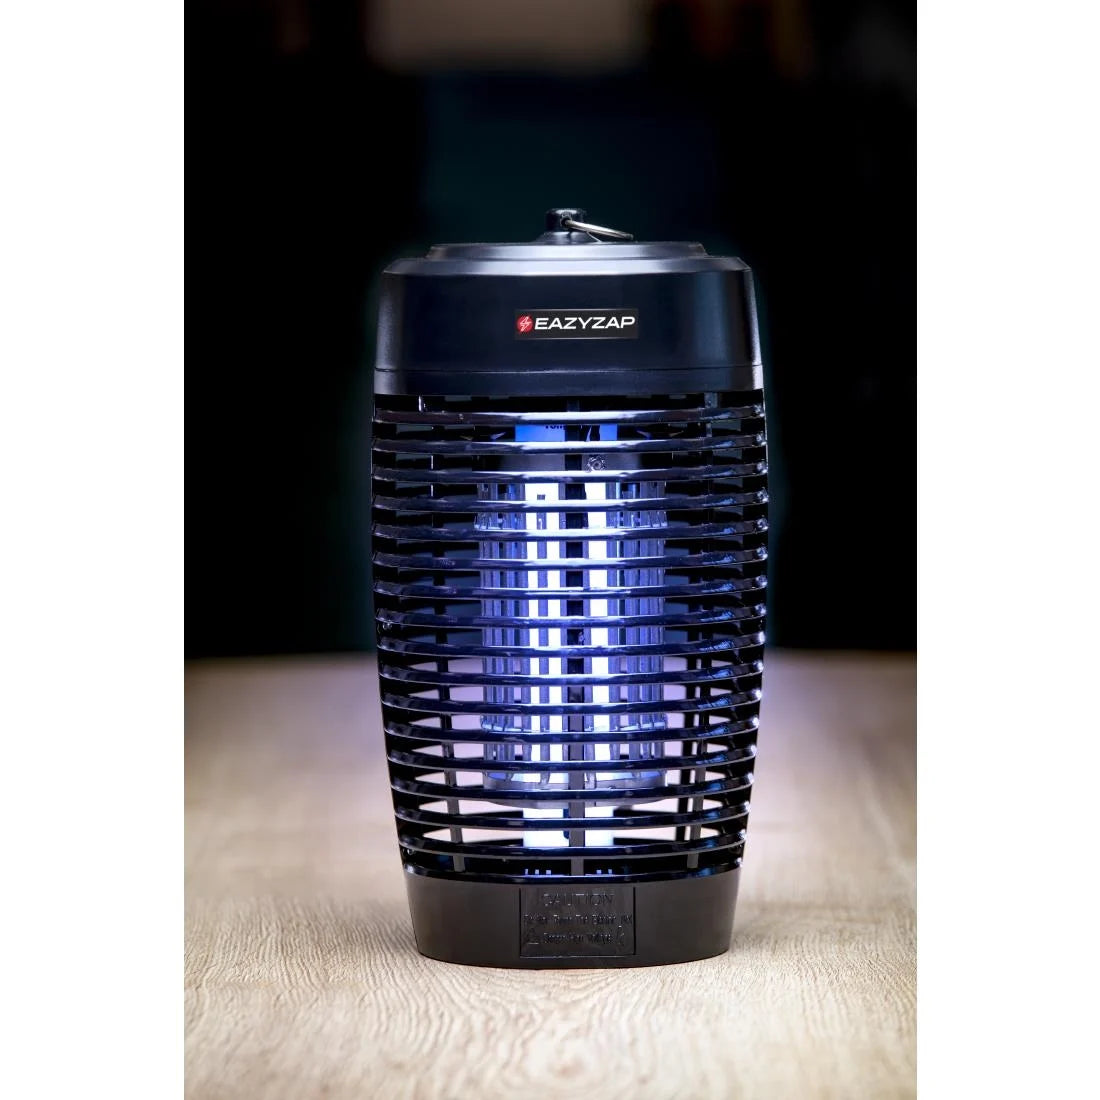 Eazyzap Indoor and Outdoor Lantern Insect Killer.Product Ref:00704.Model:DF756. 🚚 3-5 Days Delivery